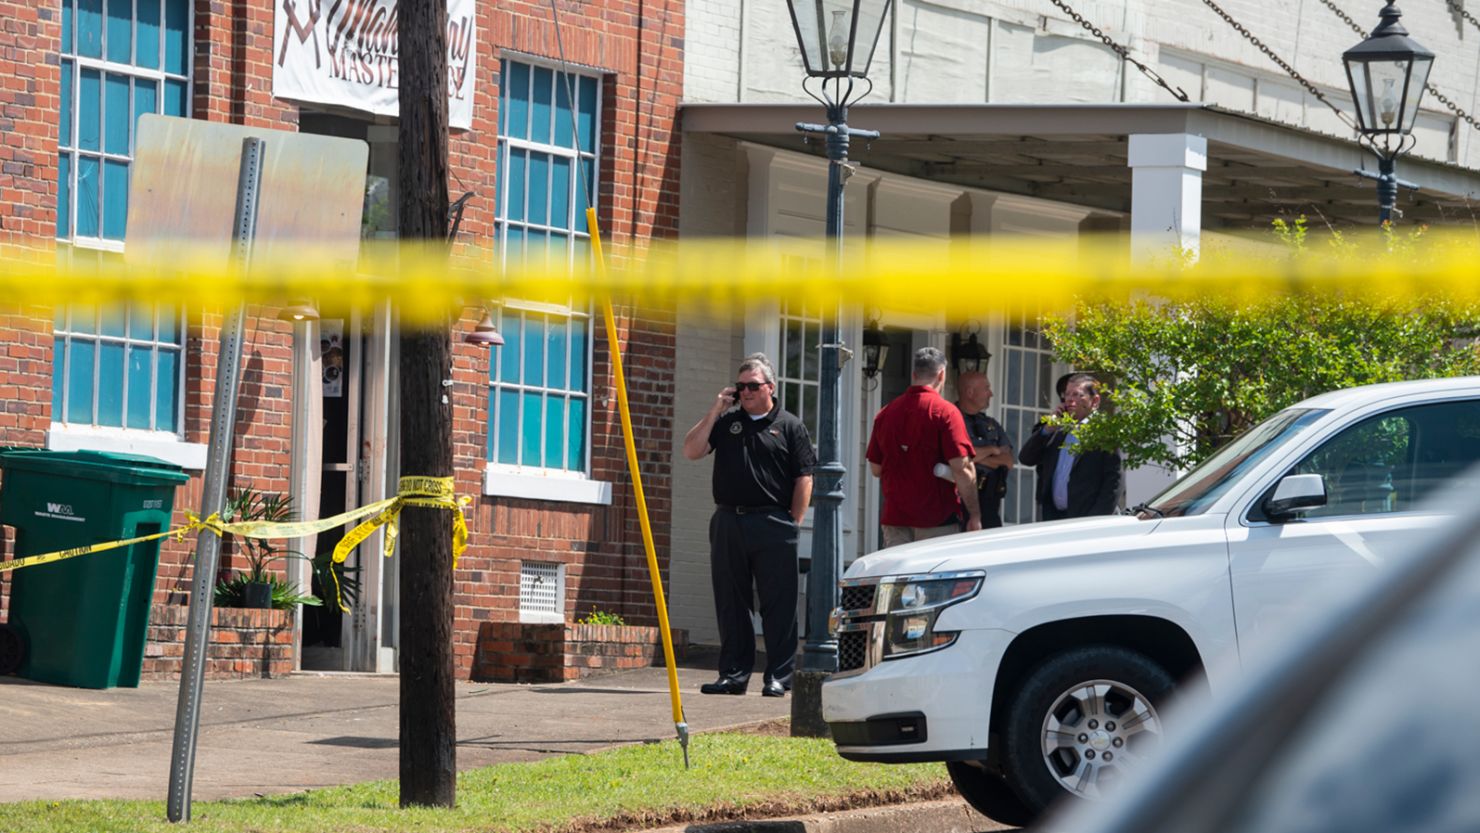 Law enforcement officers investigate the day after the April 15 shooting at a venue in downtown Dadeville, Alabama.